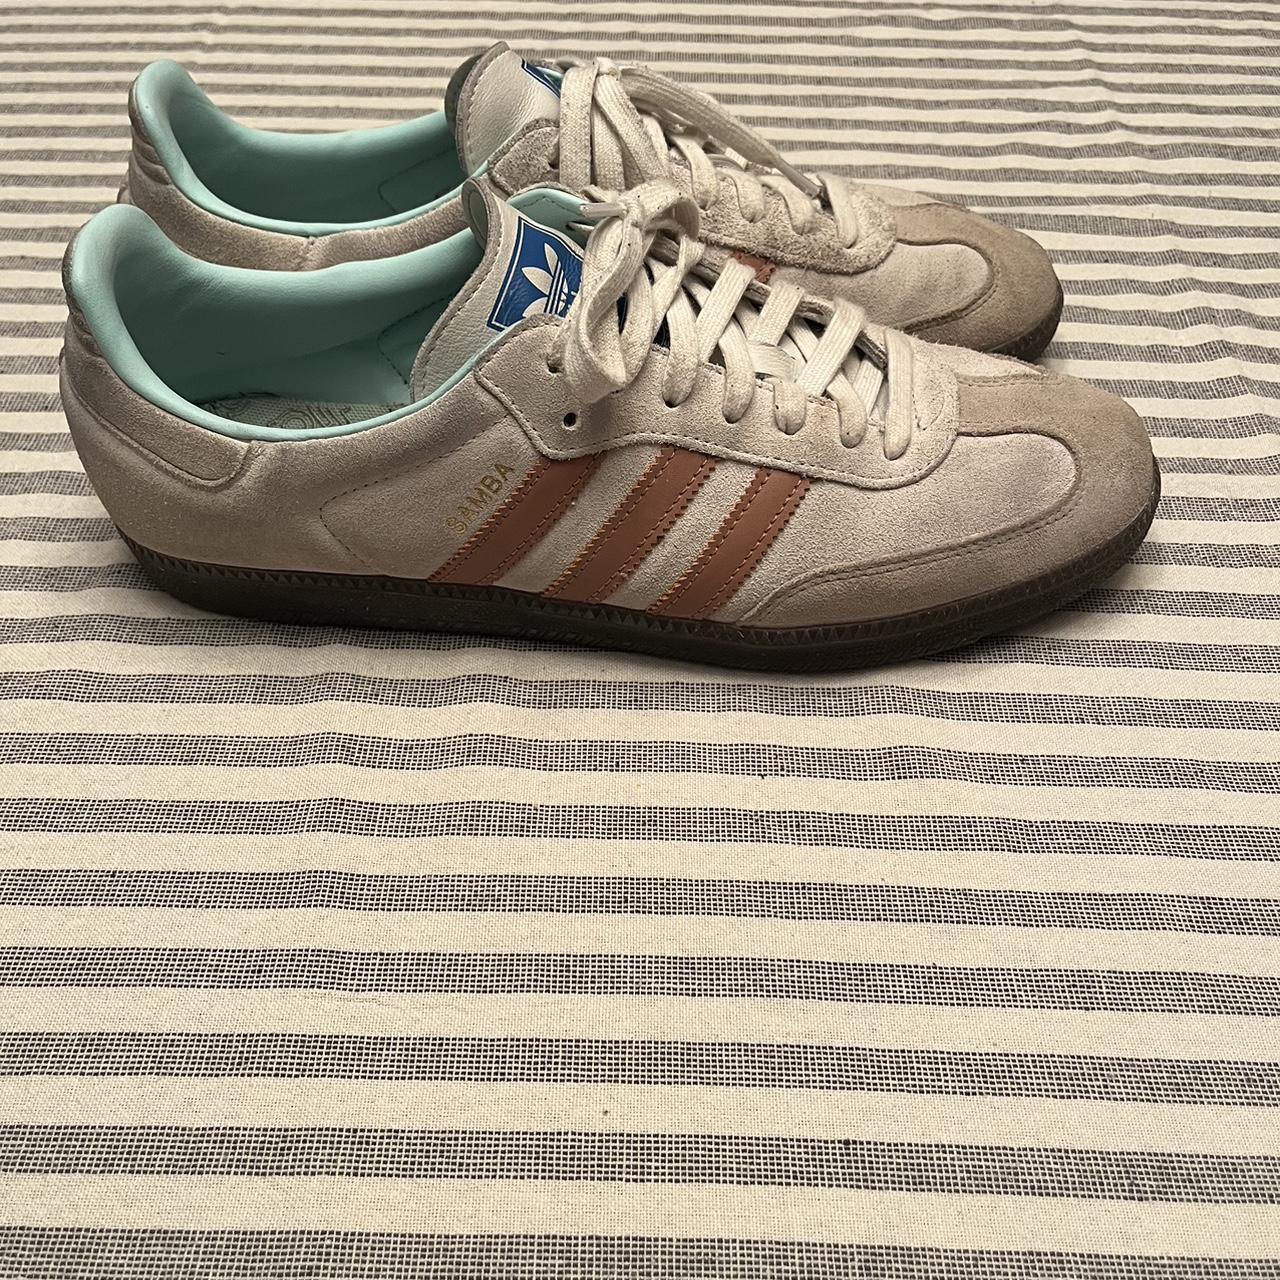 Adidas Men's Cream and Blue Trainers (4)